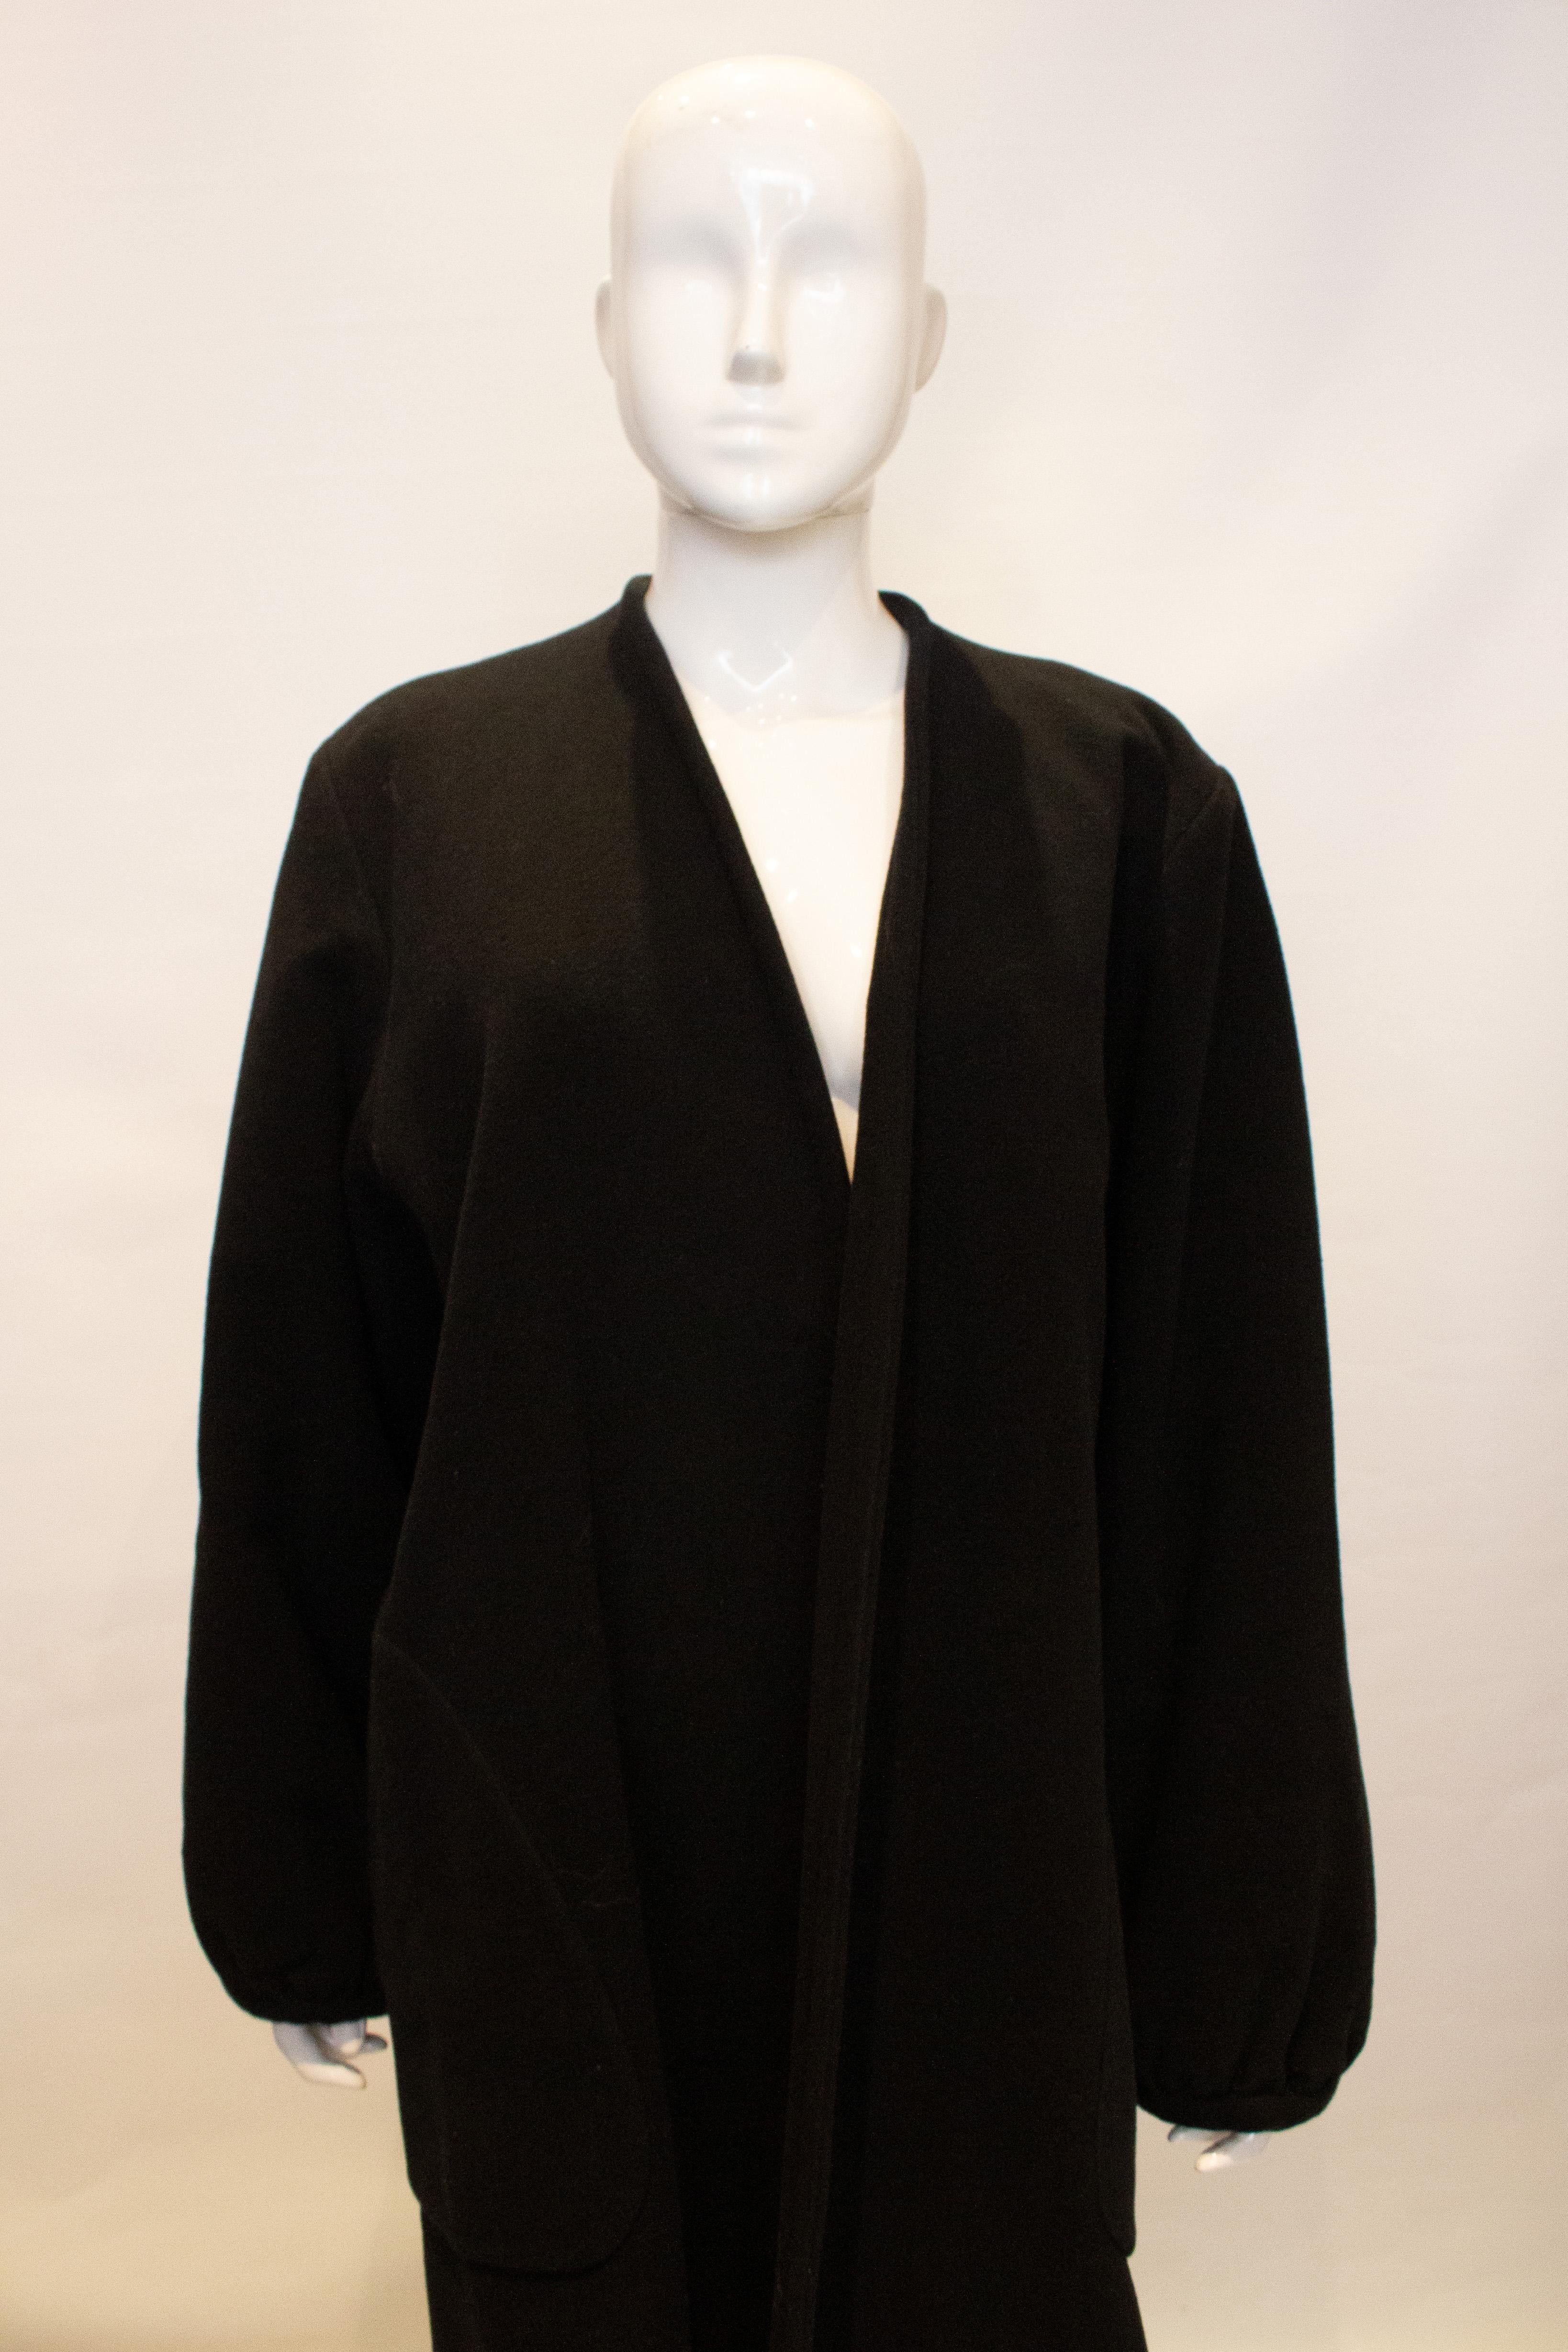 An elegant ad easy to wear black wool coat by Yves Saint Laurent , Rive Gauche, Paris. Label details, H87, H 7177. 100% wool. The coat is collarless, with gathered cuffs and a pocket on either side. The upper part of the coat is lined. Size 36